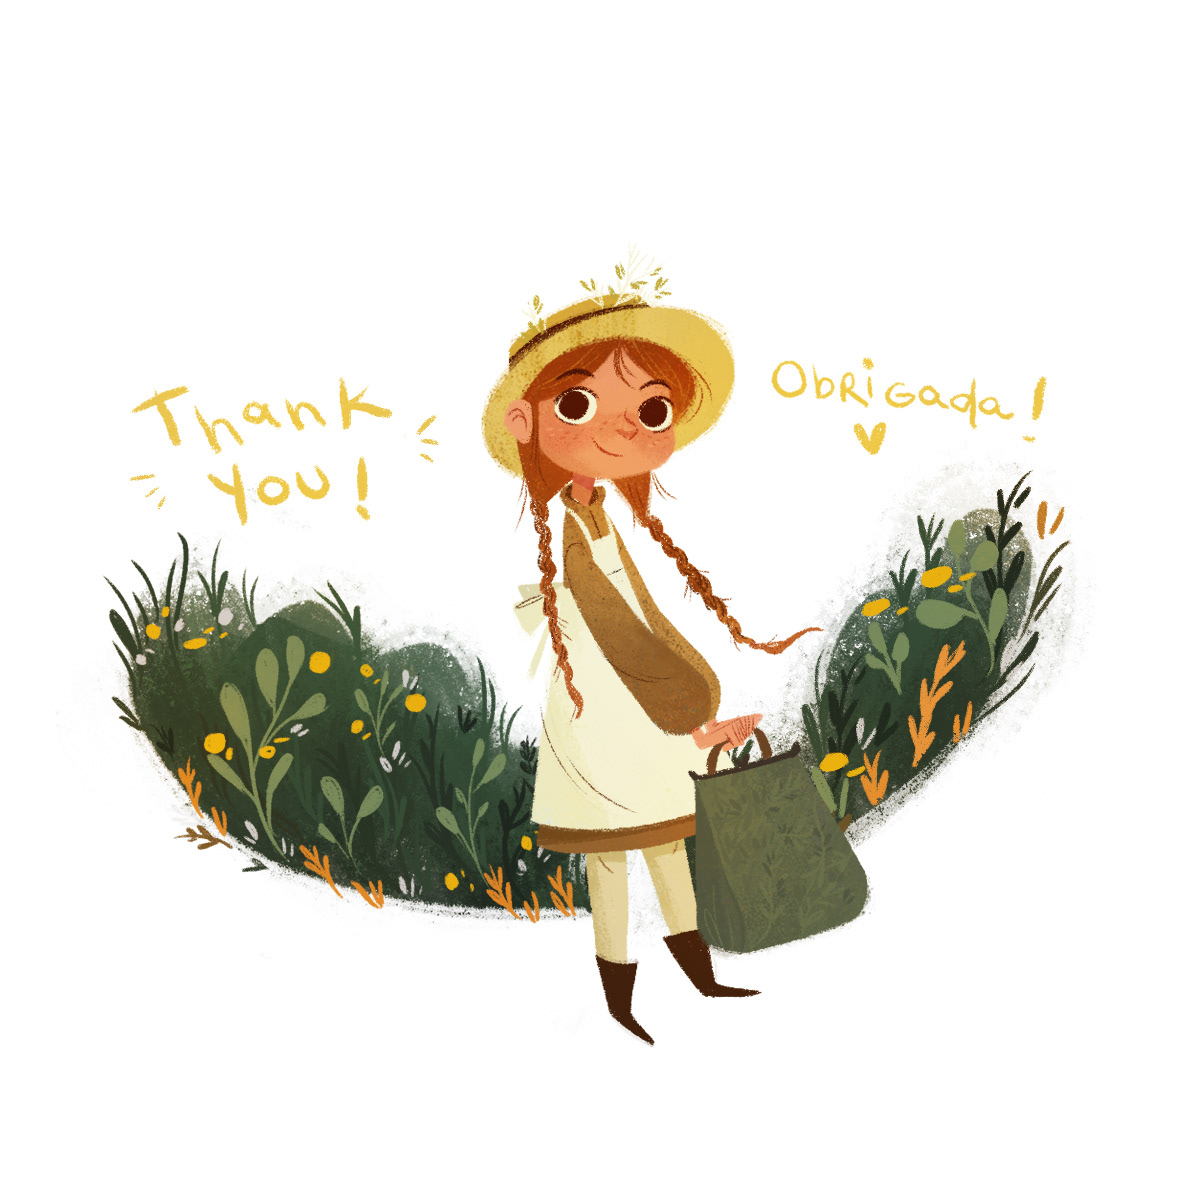 anne of green gables Anne with an E Beatriz book cover childrens book Livro livro infantil Mayumi Netflix Picture book